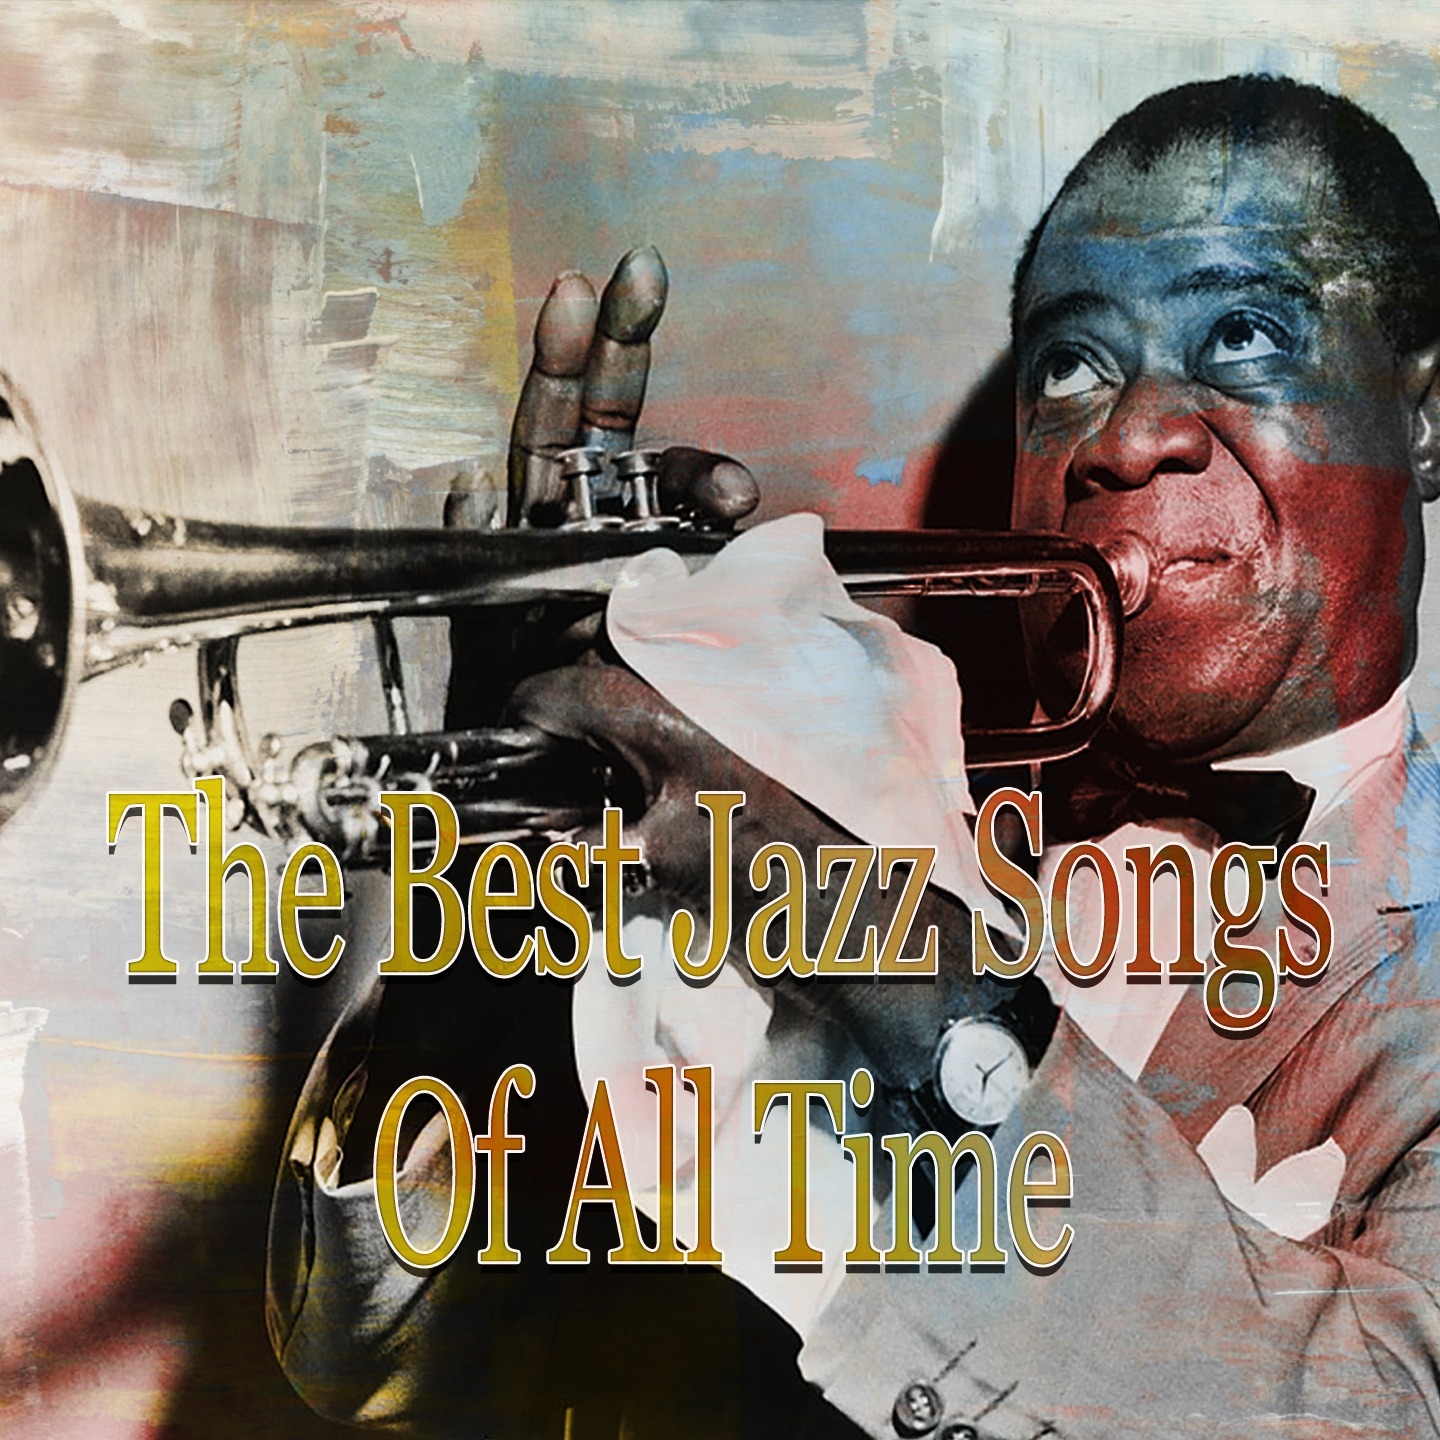 The Best Jazz Songs of All Time